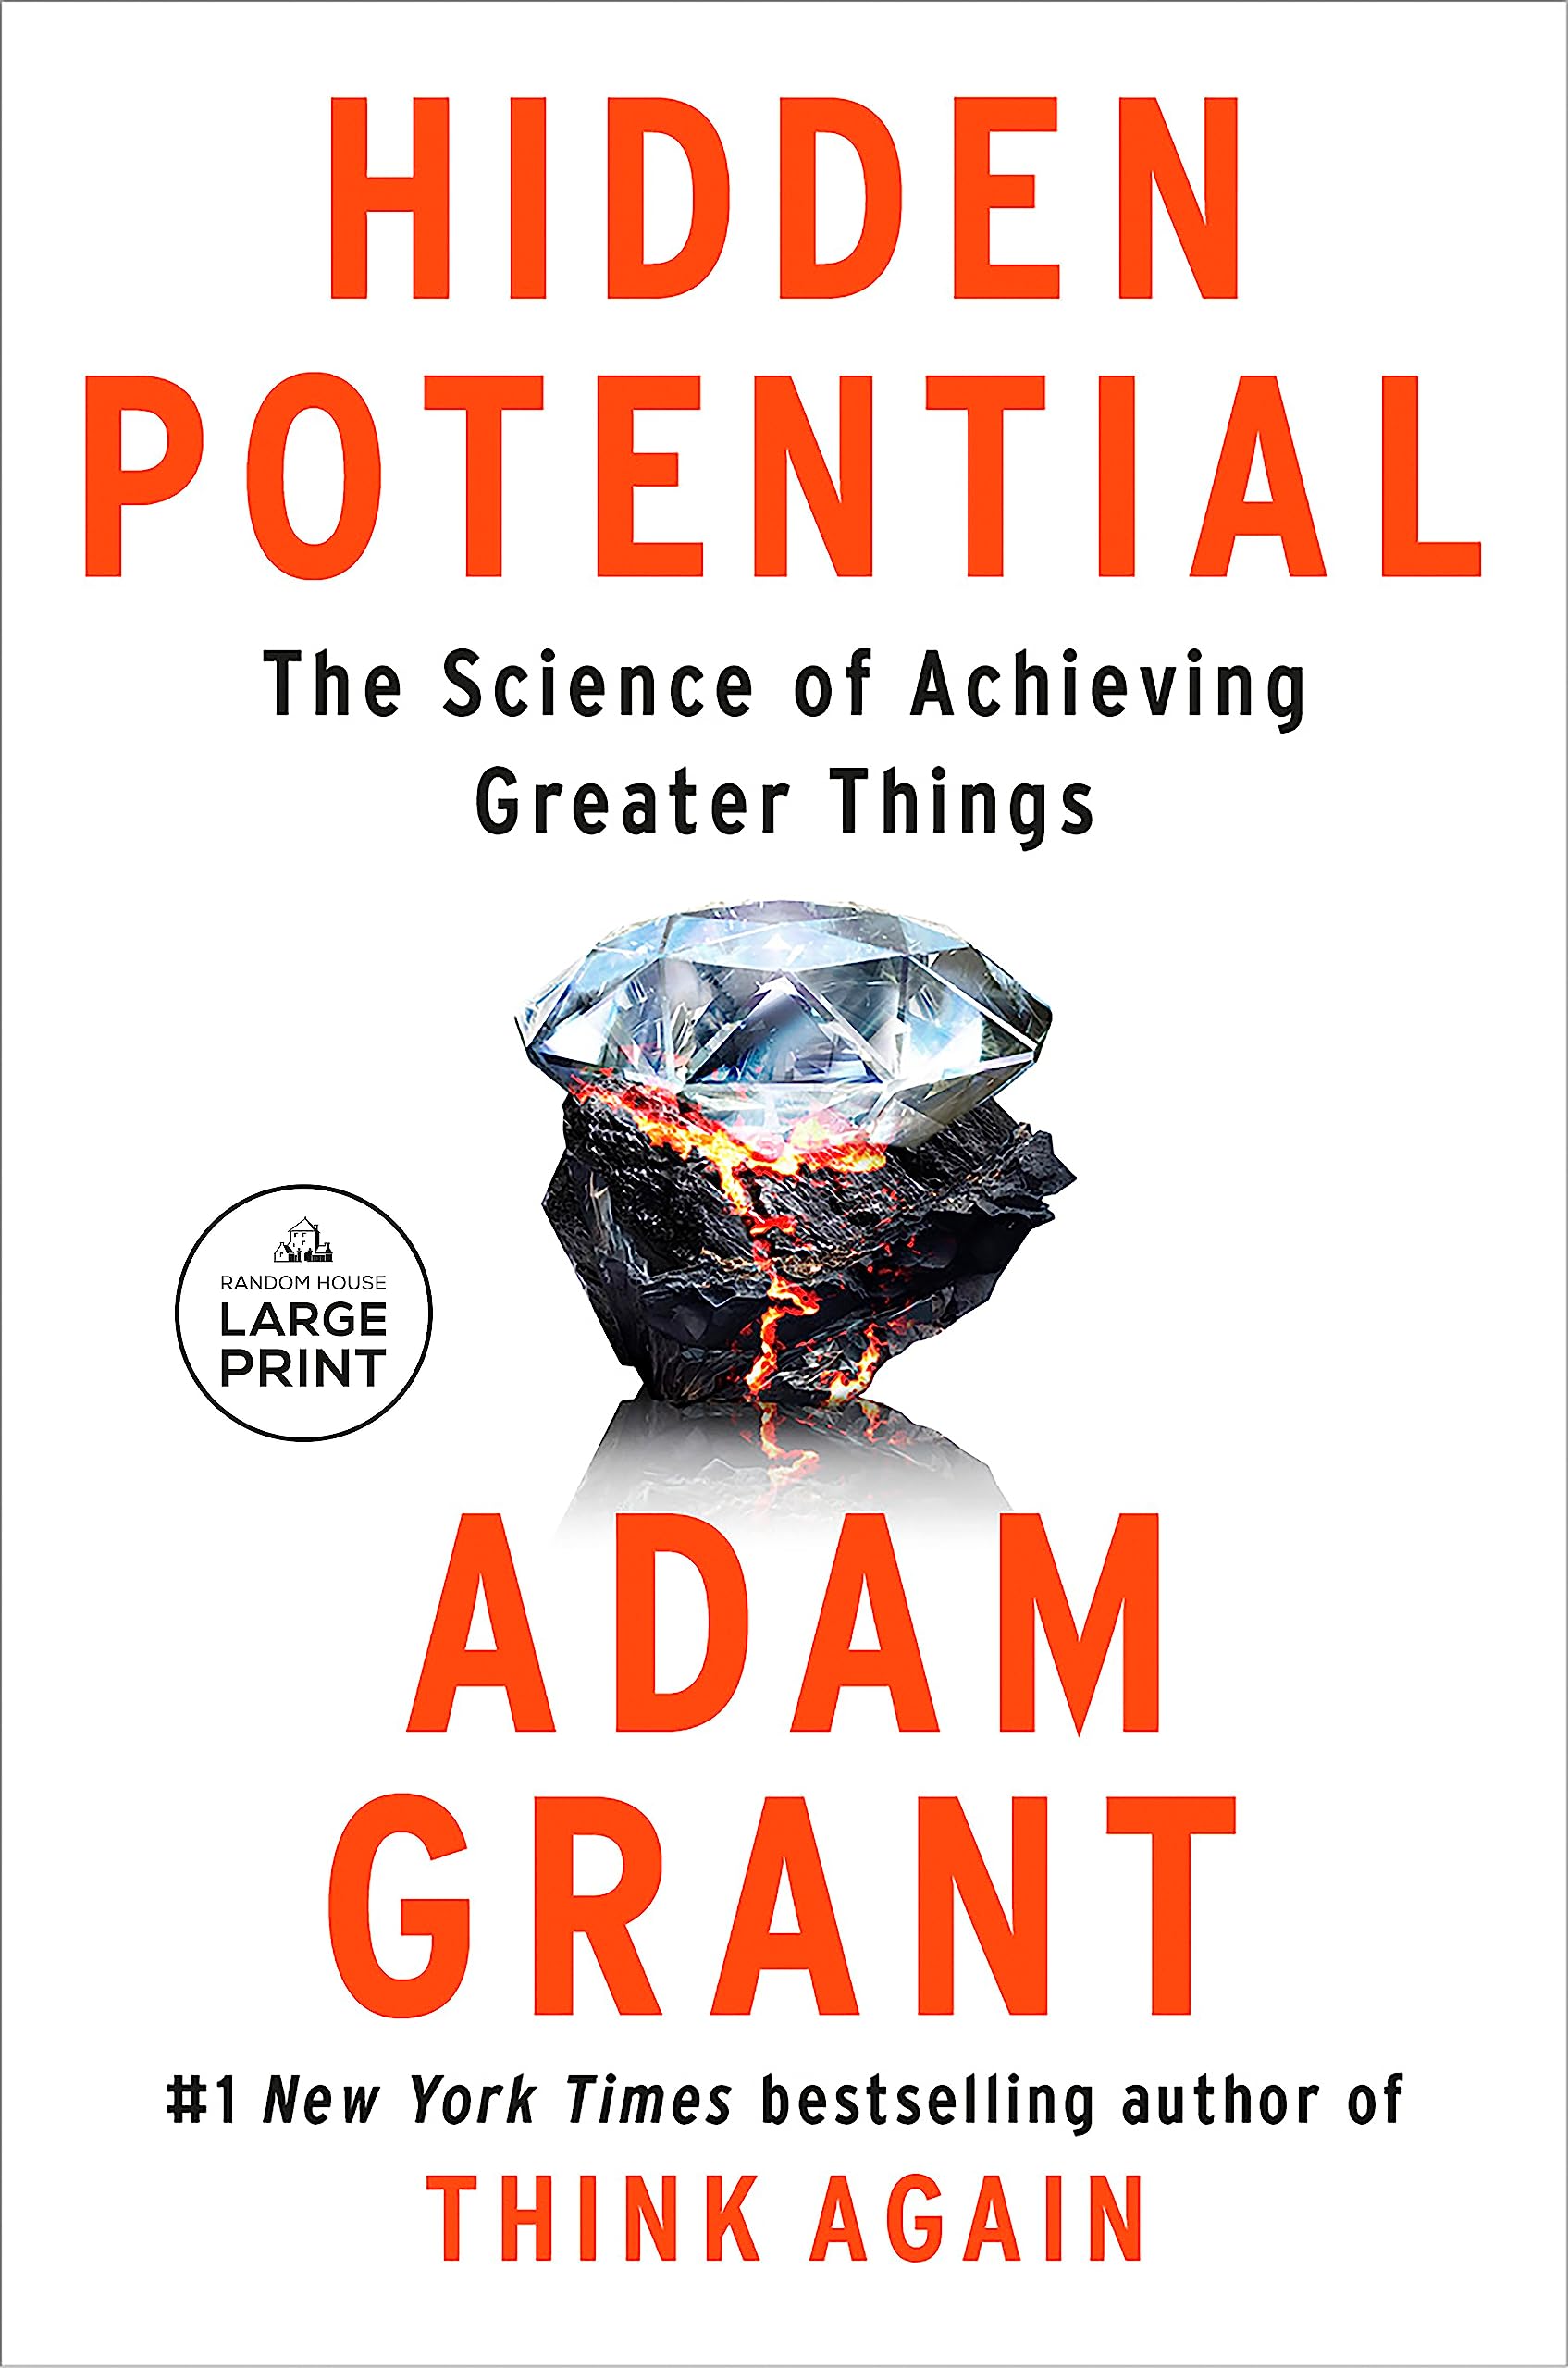 Hidden Potential: The Science of Achieving Greater Things (Random House Large Print)